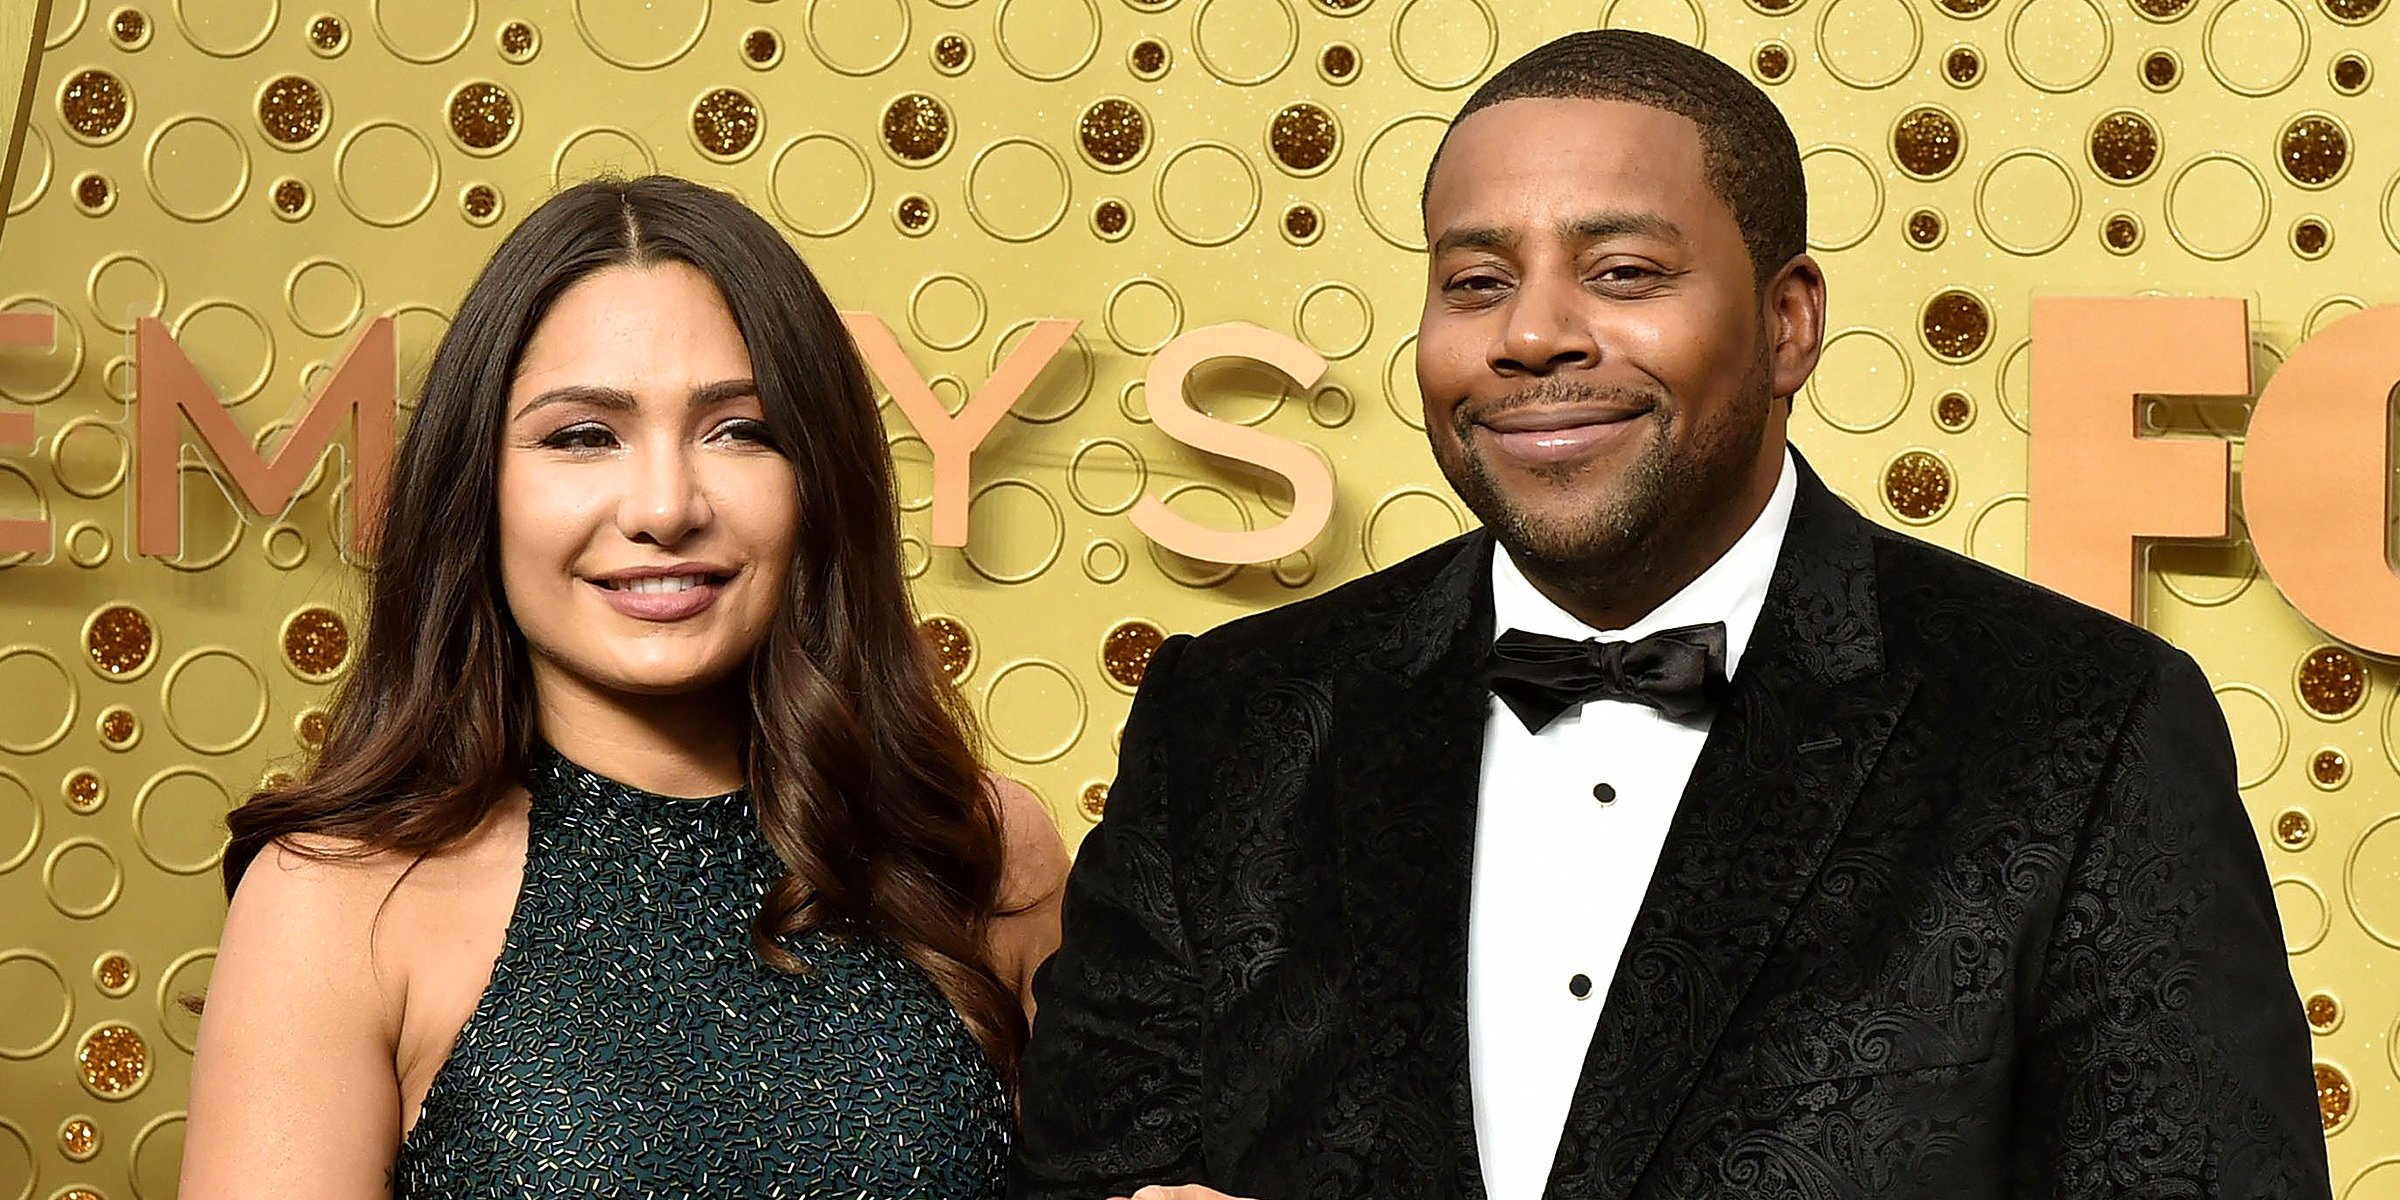 Christina Evangeline and Kenan Thompson. | Source: Getty Images